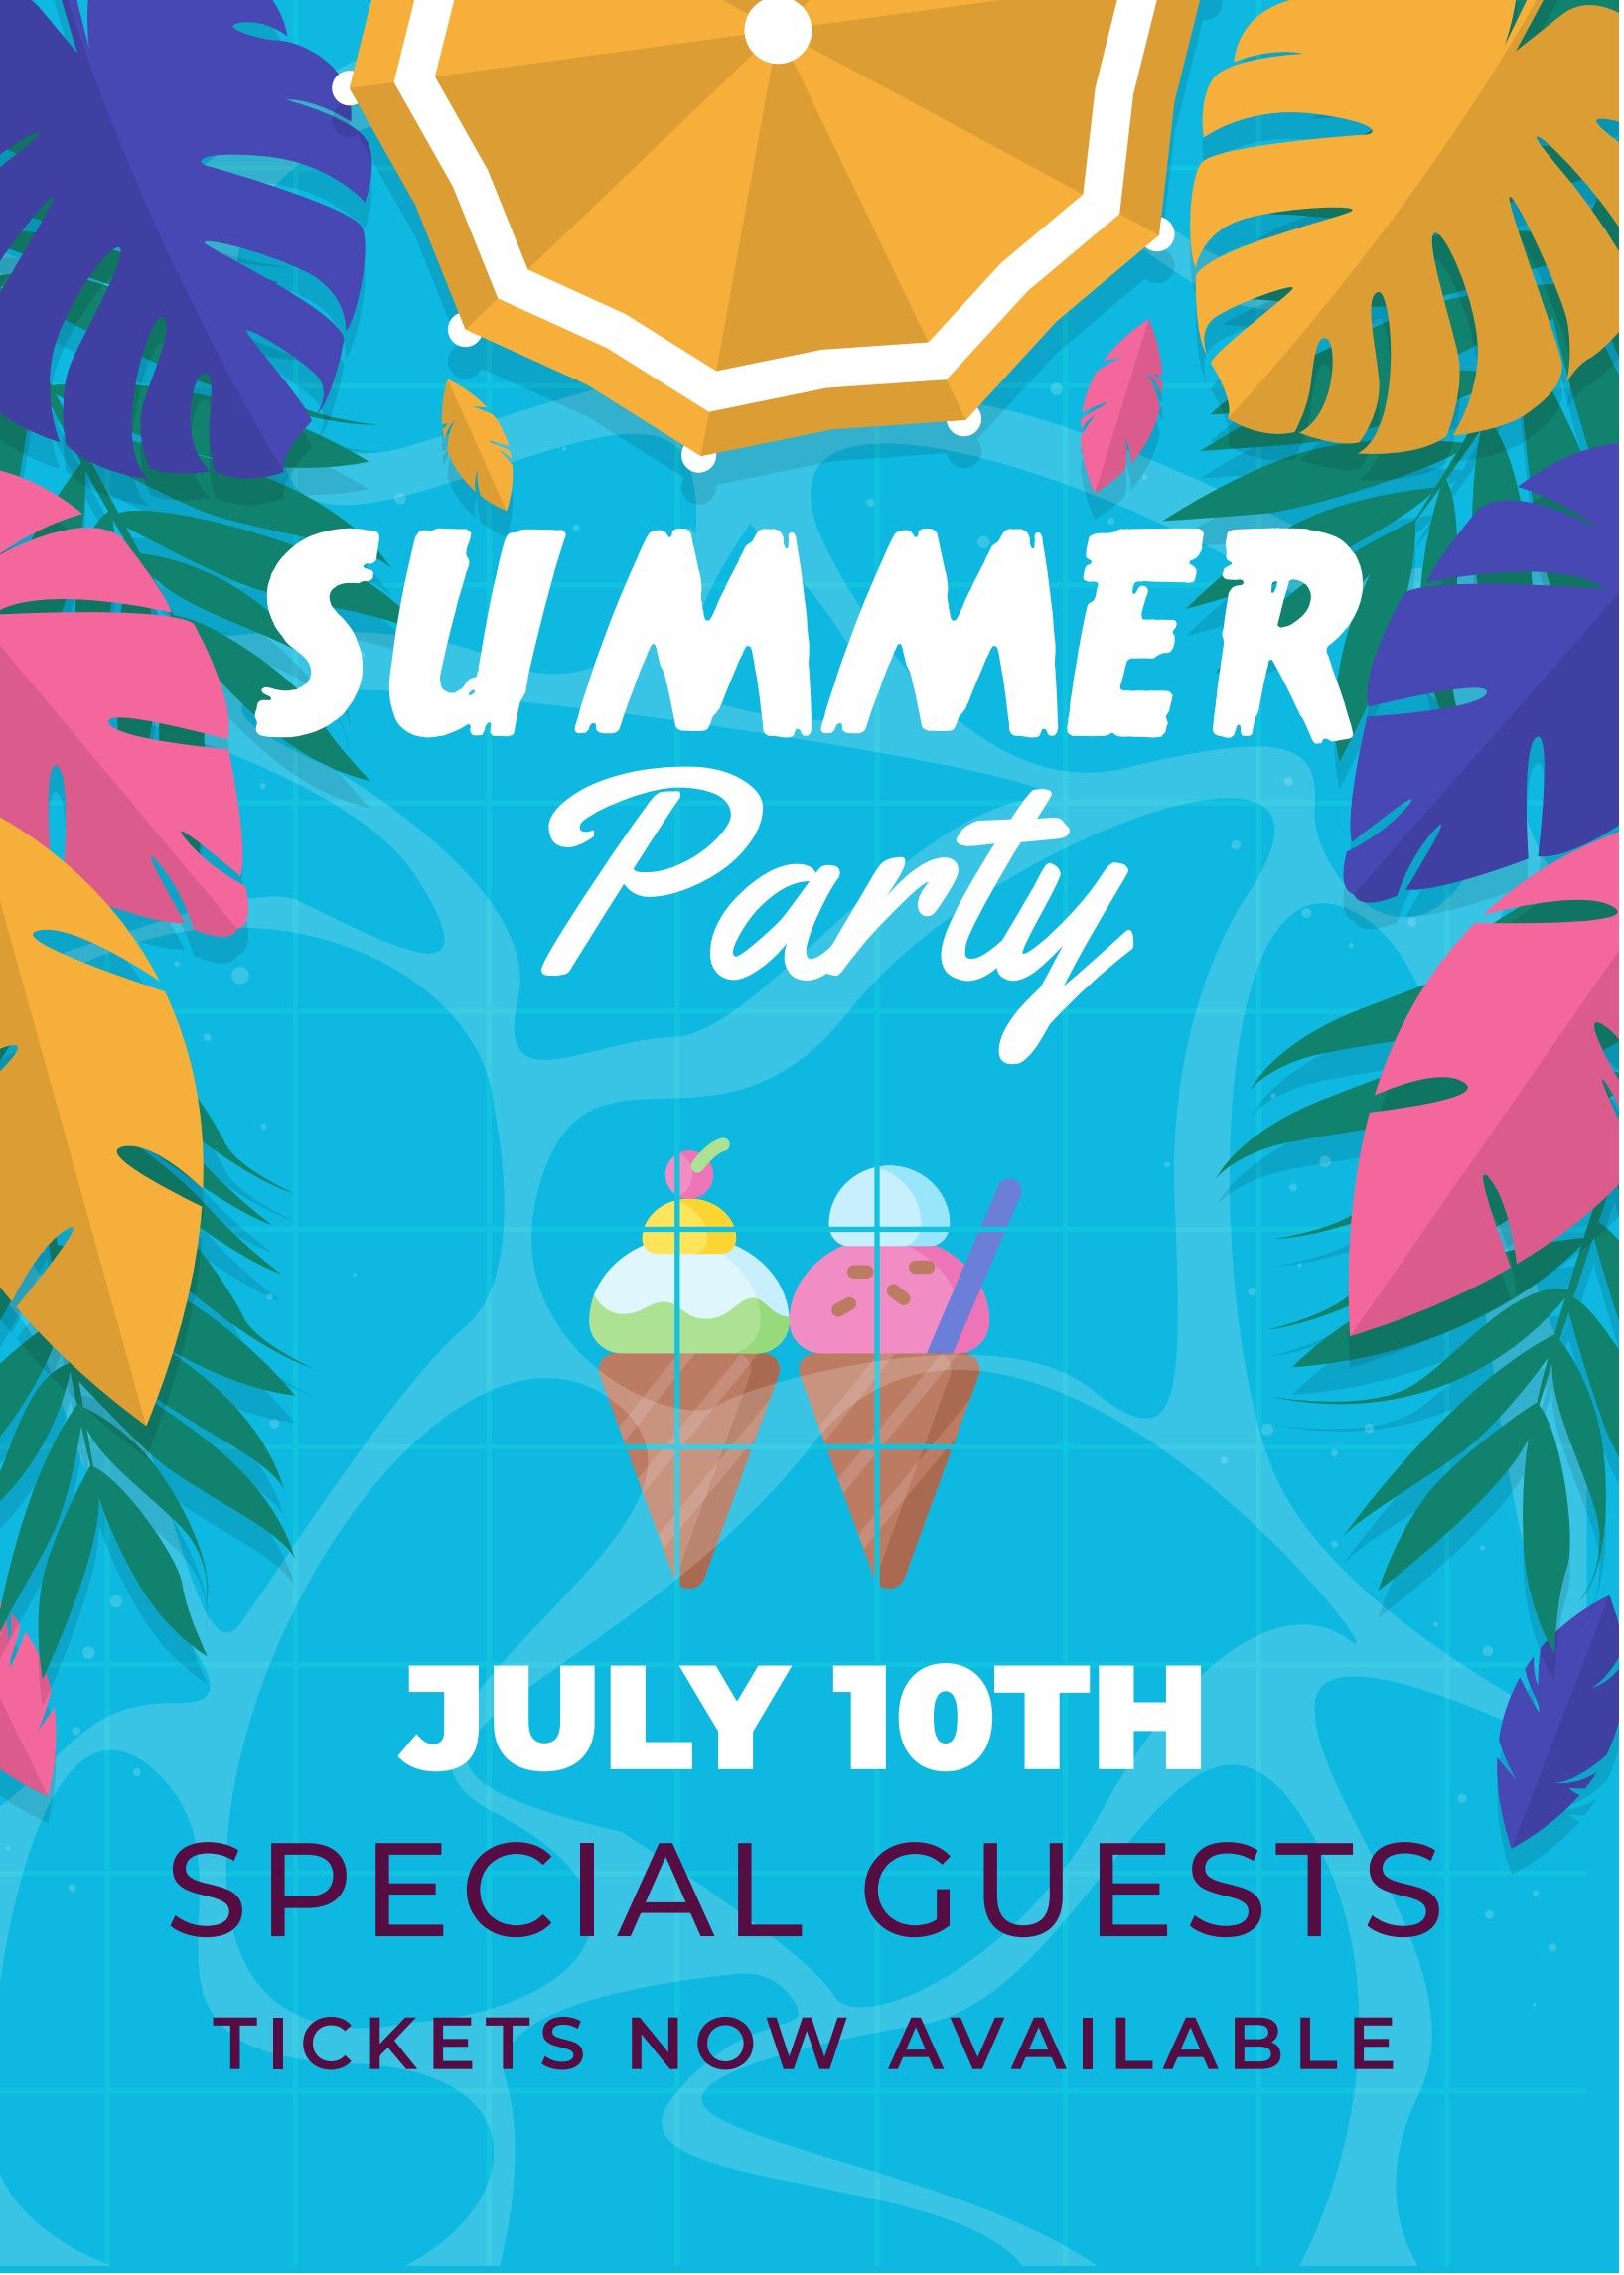 summer party invitation template